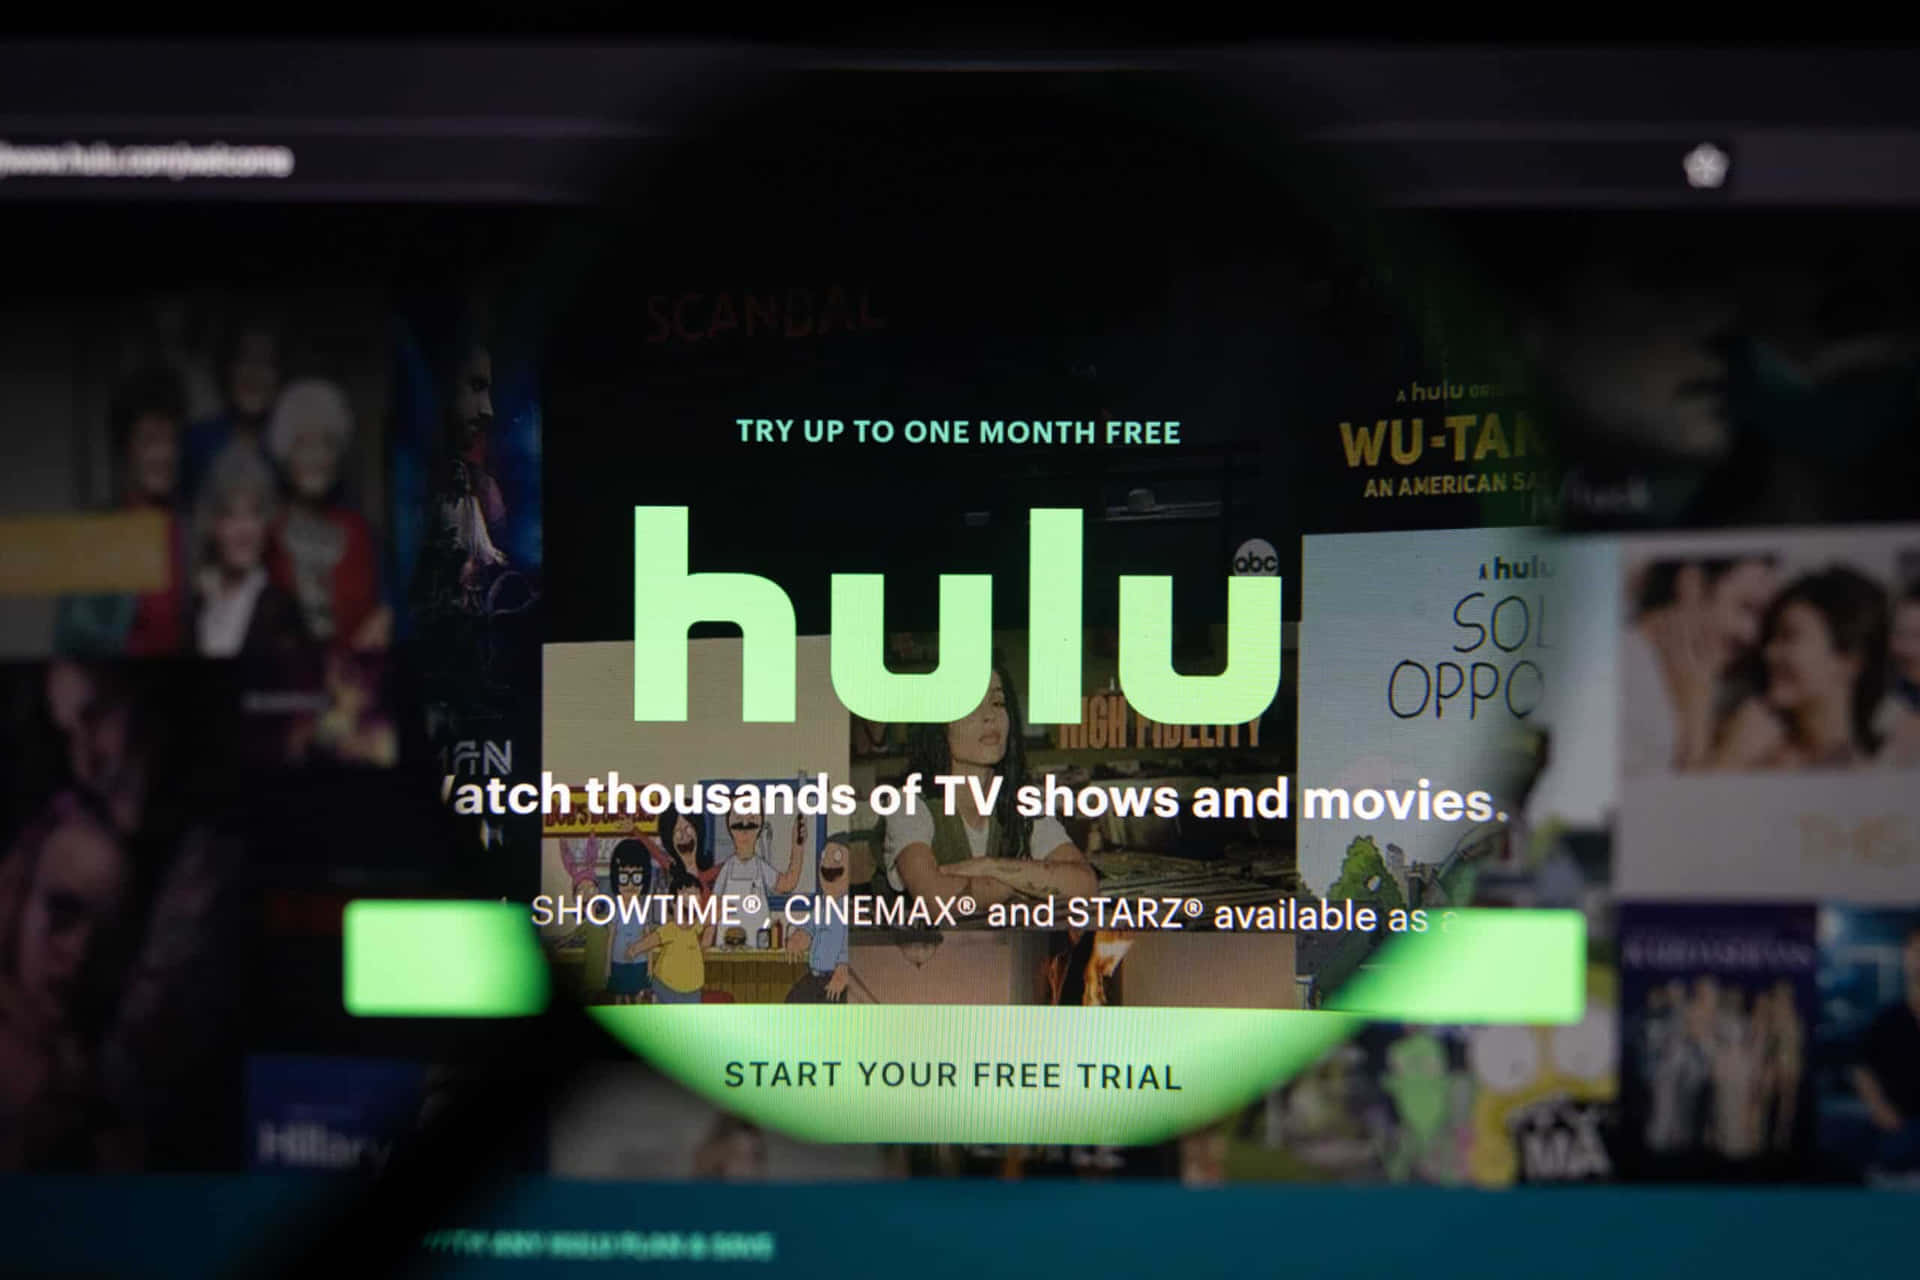 Enjoy streaming your favorite shows and movies on Hulu